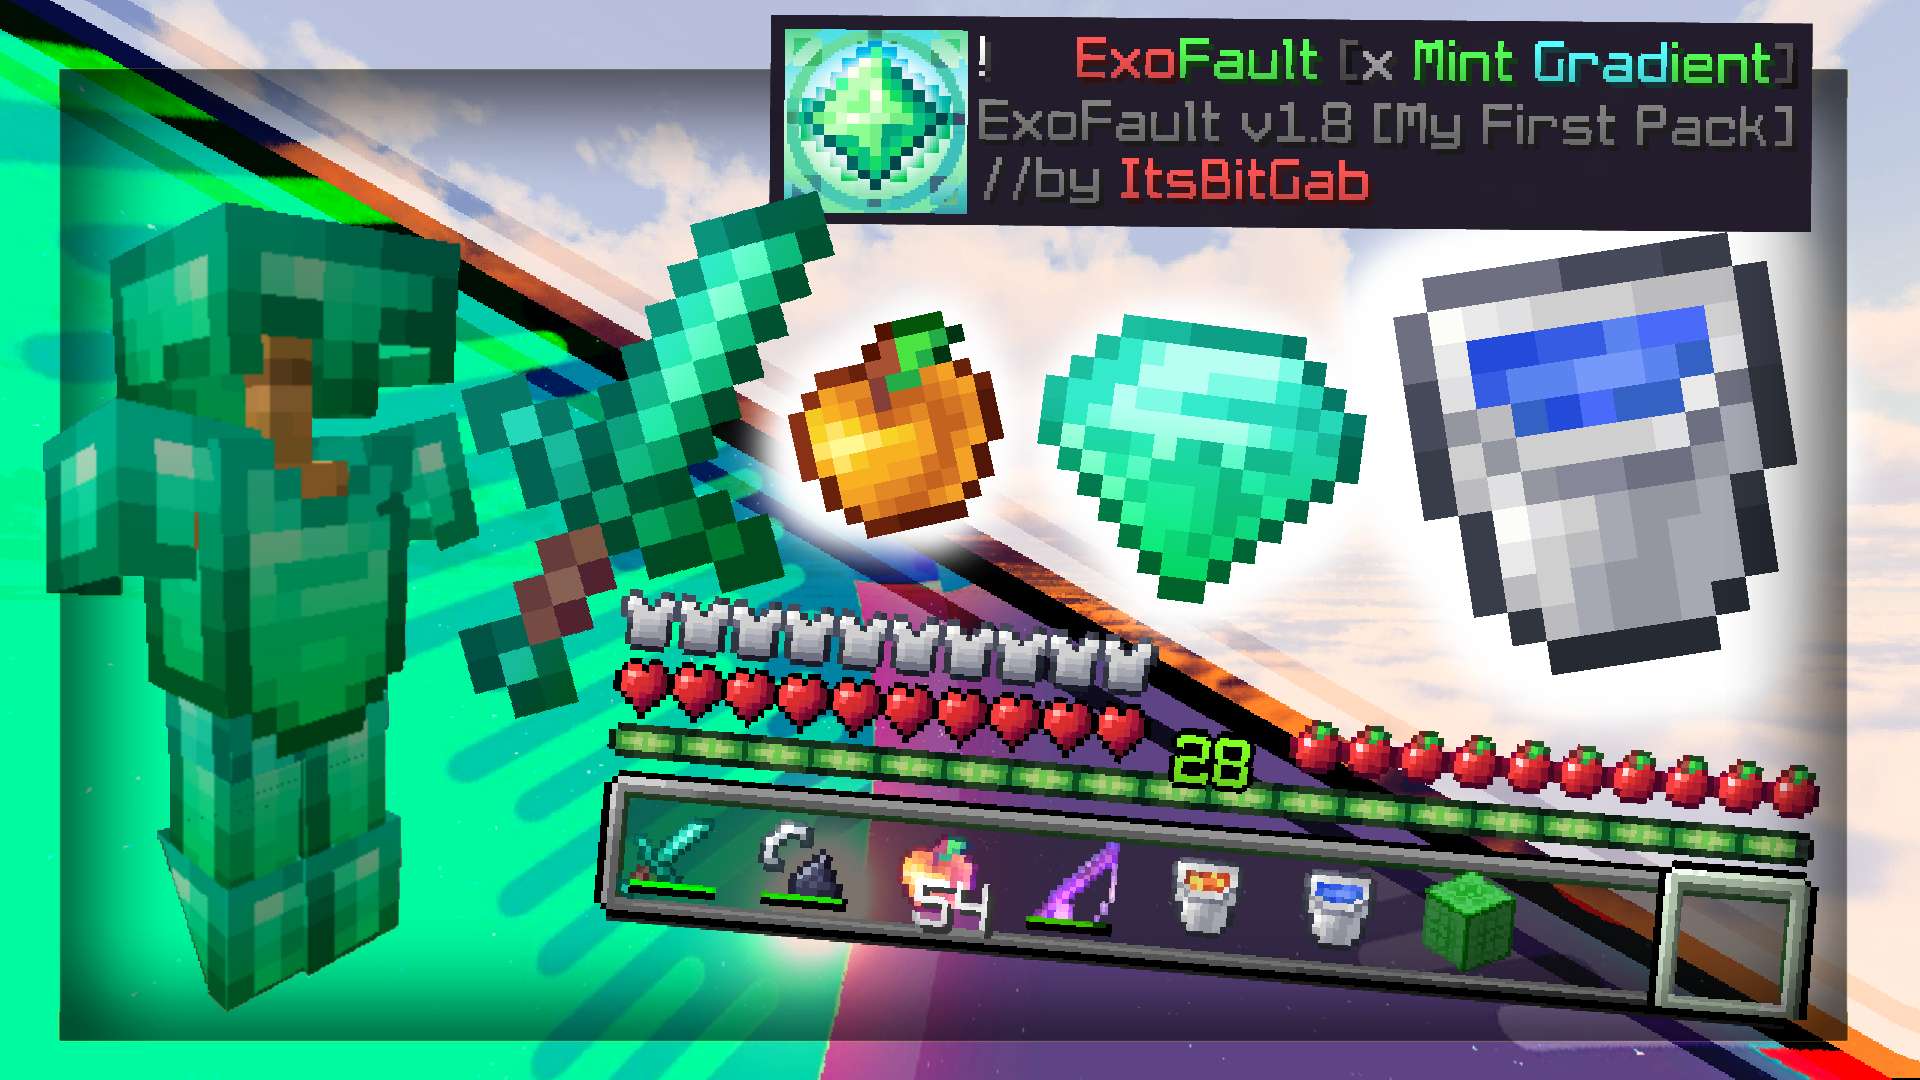 Exofault [x Mint Gradient Recolor] 16 by BitGabHere on PvPRP